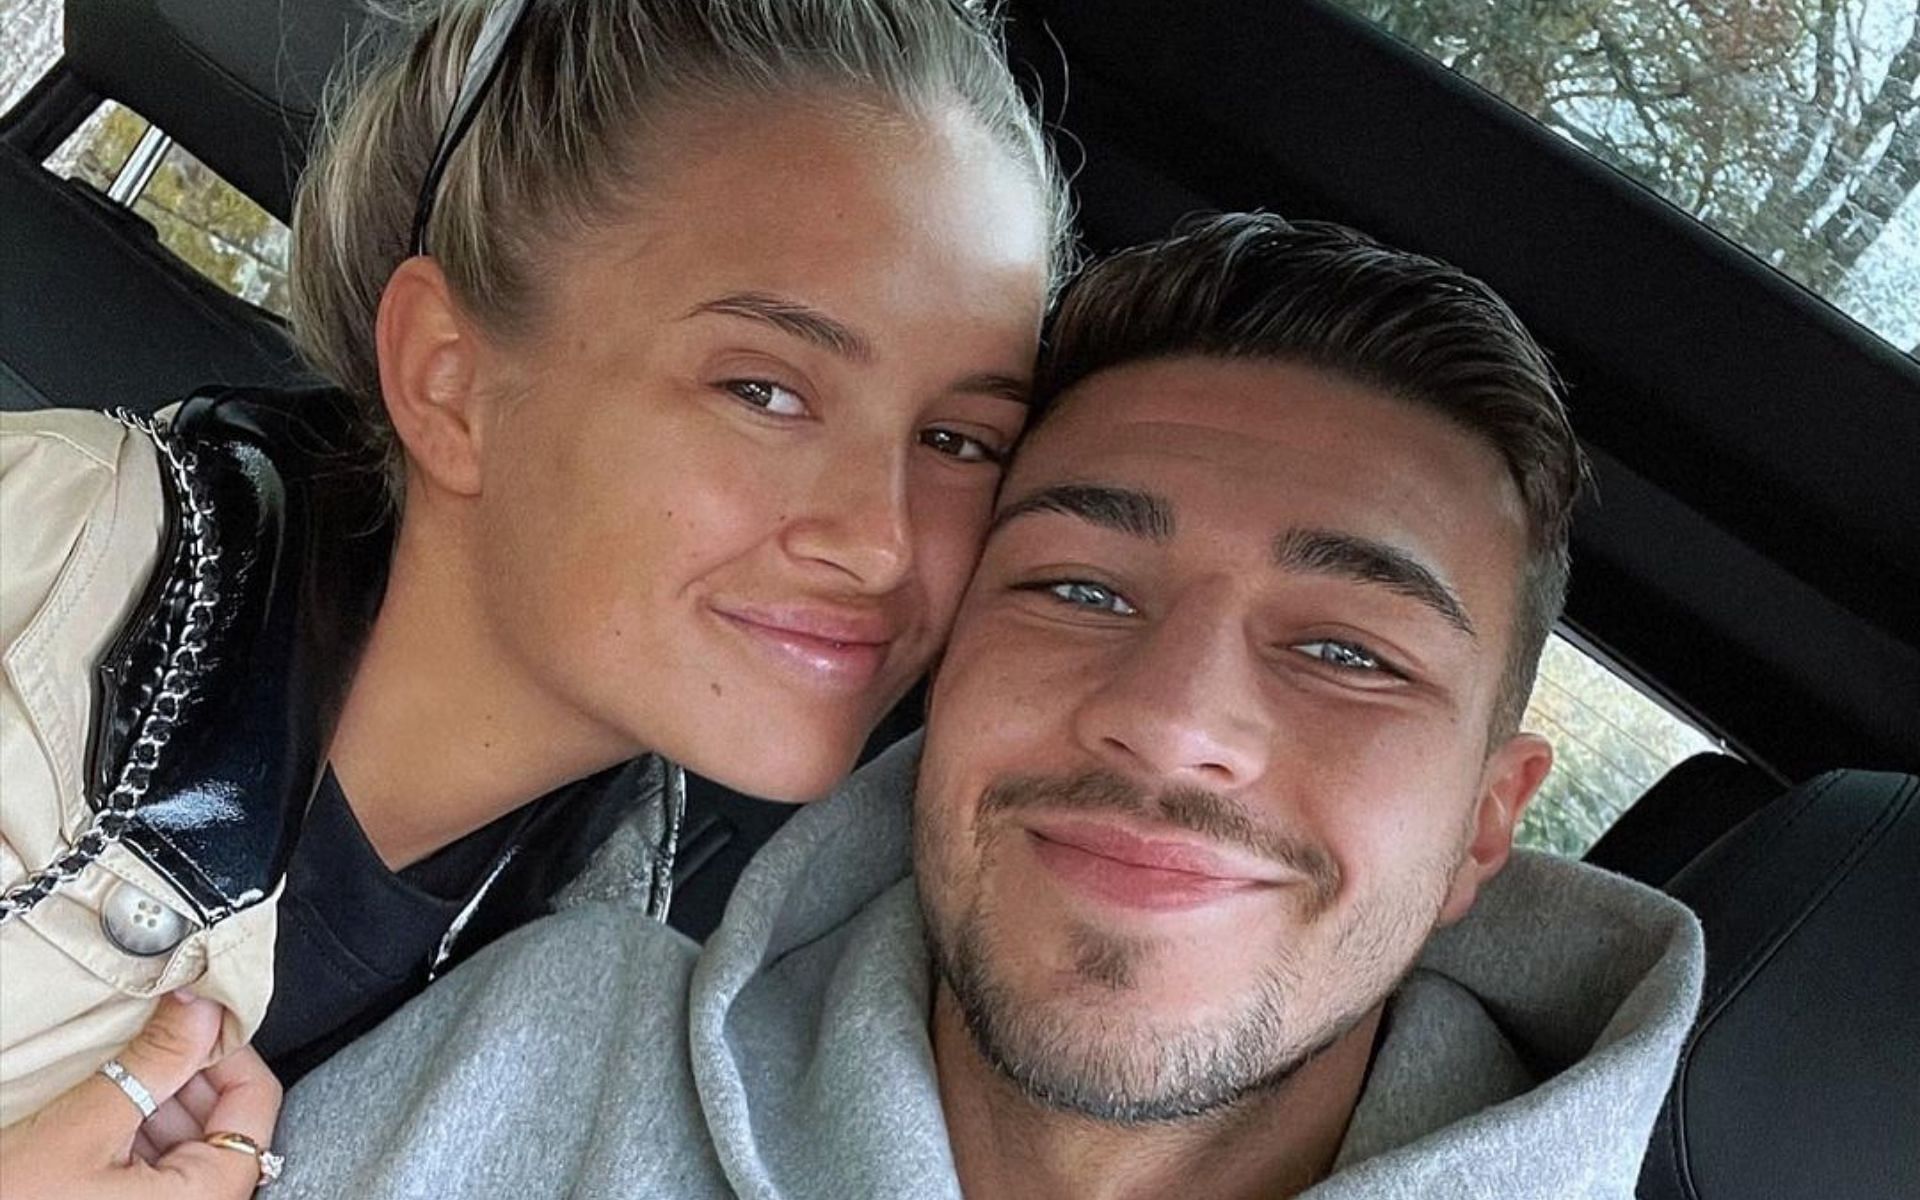 Molly-Mae Hague (left) and Tommy Fury (right) [Image credits: @tommyfury on Instagram]